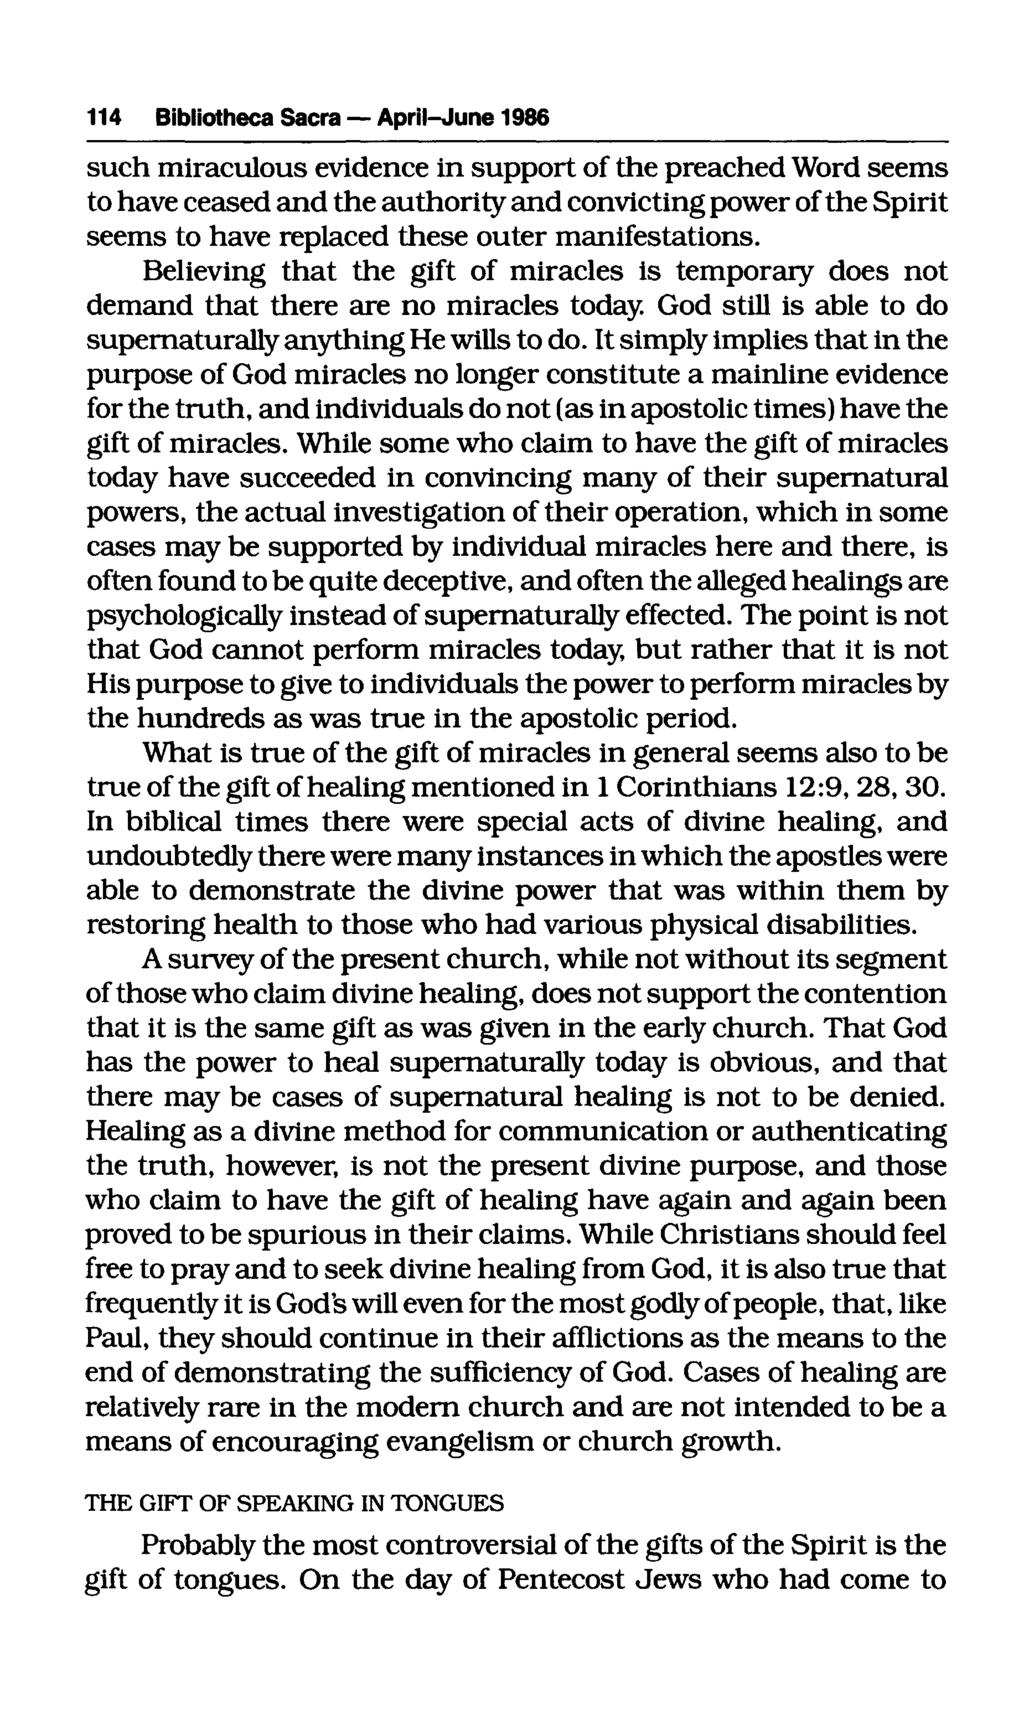 114 Bibliotheca Sacra April-June 1986 such miraculous evidence in support of the preached Word seems to have ceased and the authority and convicting power of the Spirit seems to have replaced these